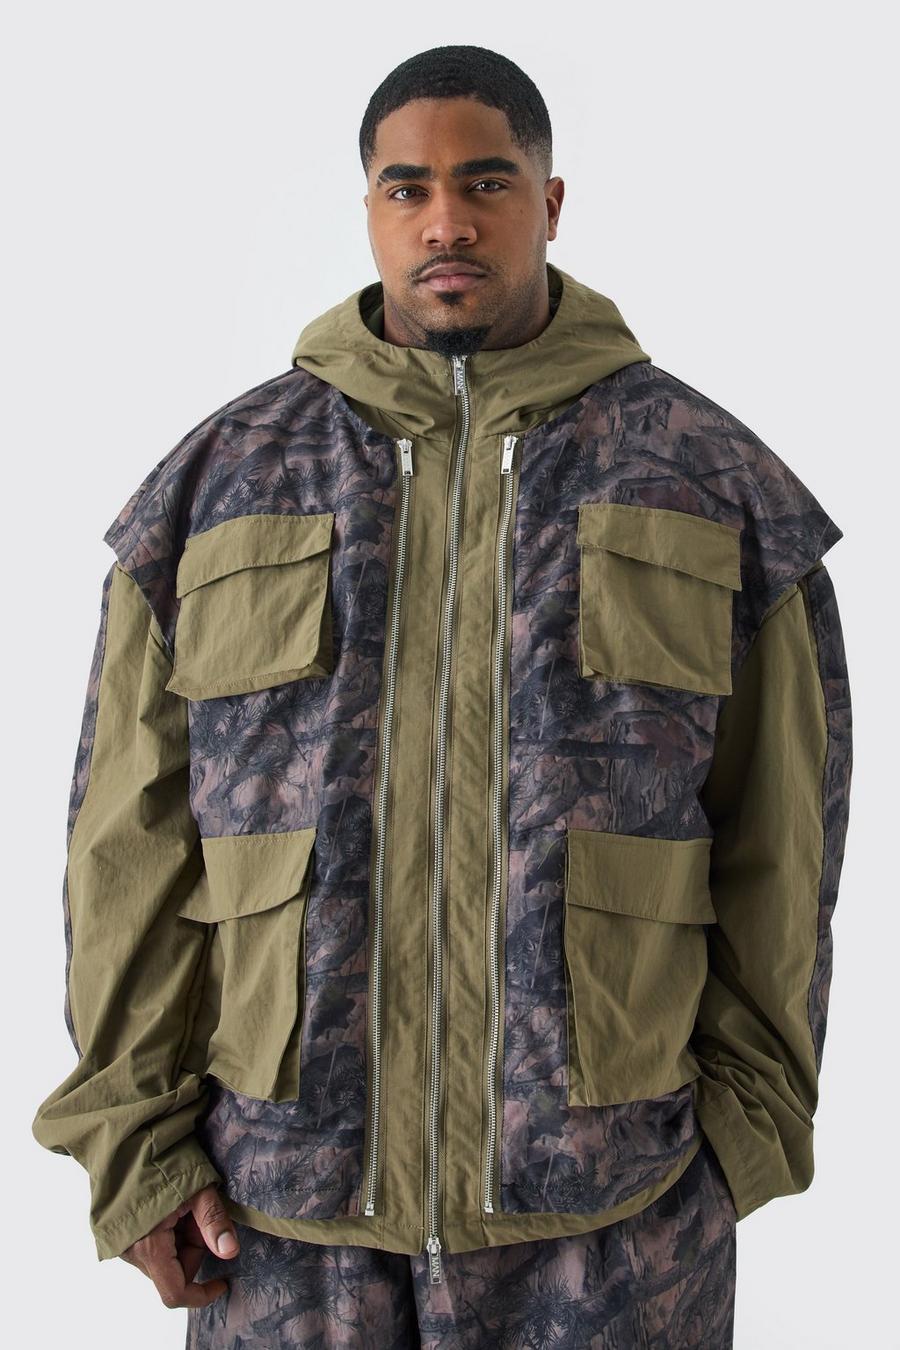 Cagoule camouflage  Cagoule style – Page 2